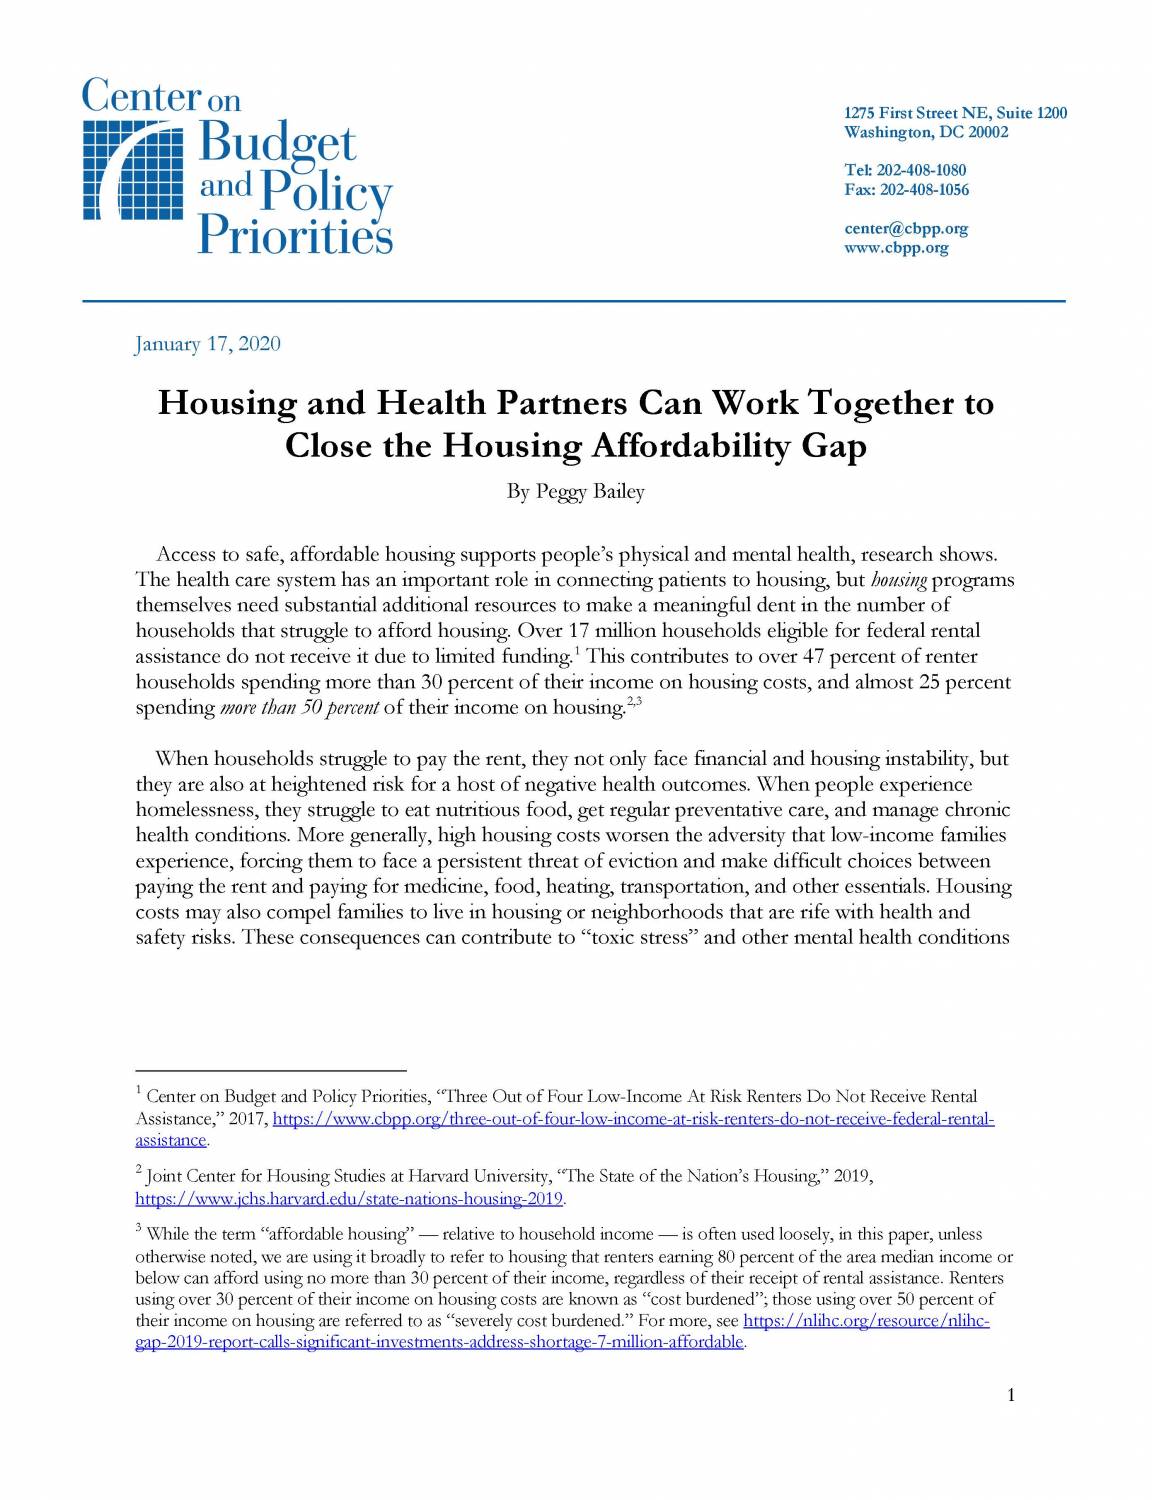 Housing and Health Partners Can Work Together to Close the Housing Affordability Gap